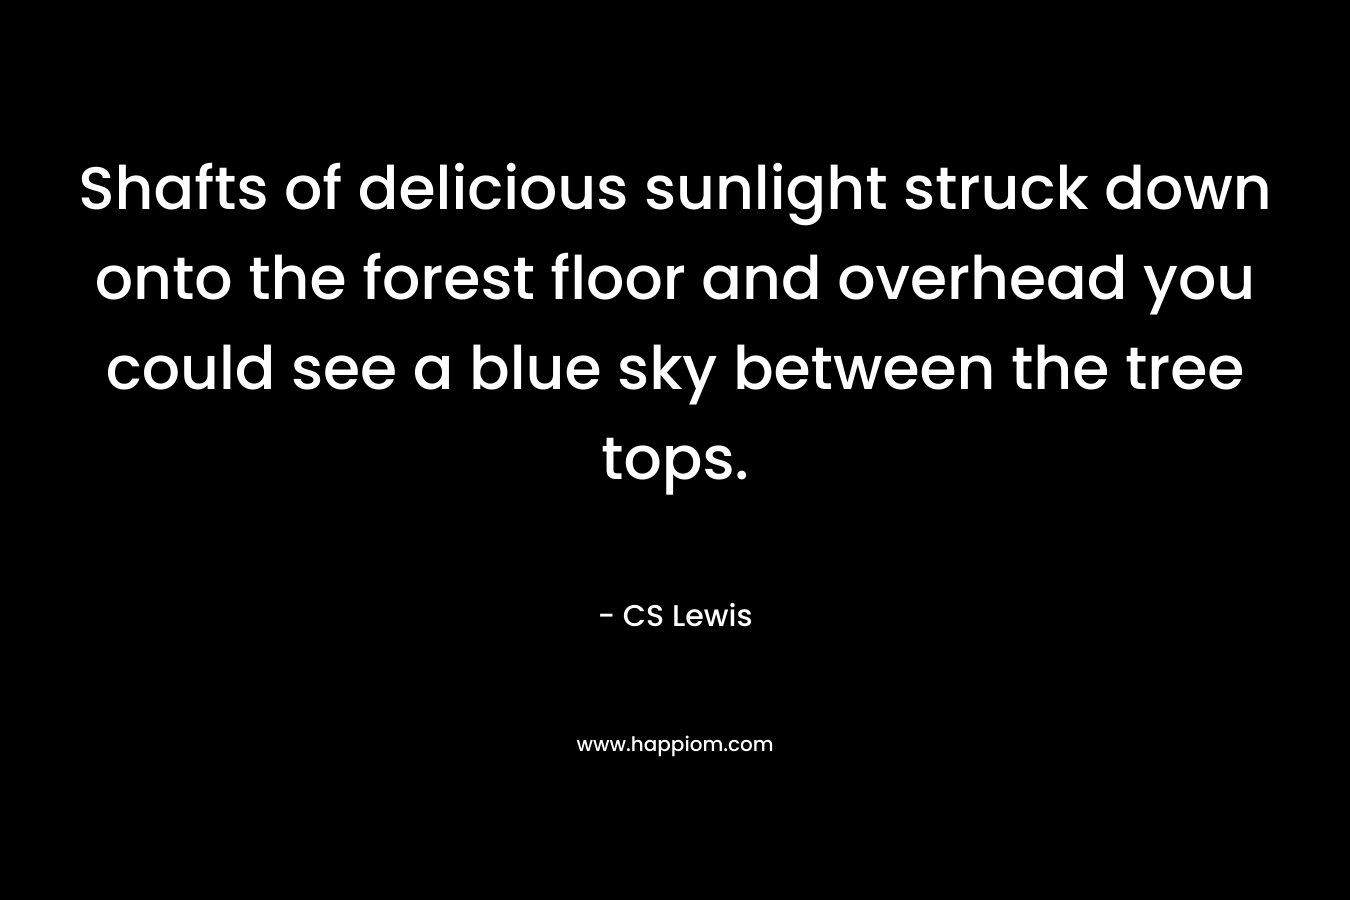 Shafts of delicious sunlight struck down onto the forest floor and overhead you could see a blue sky between the tree tops.